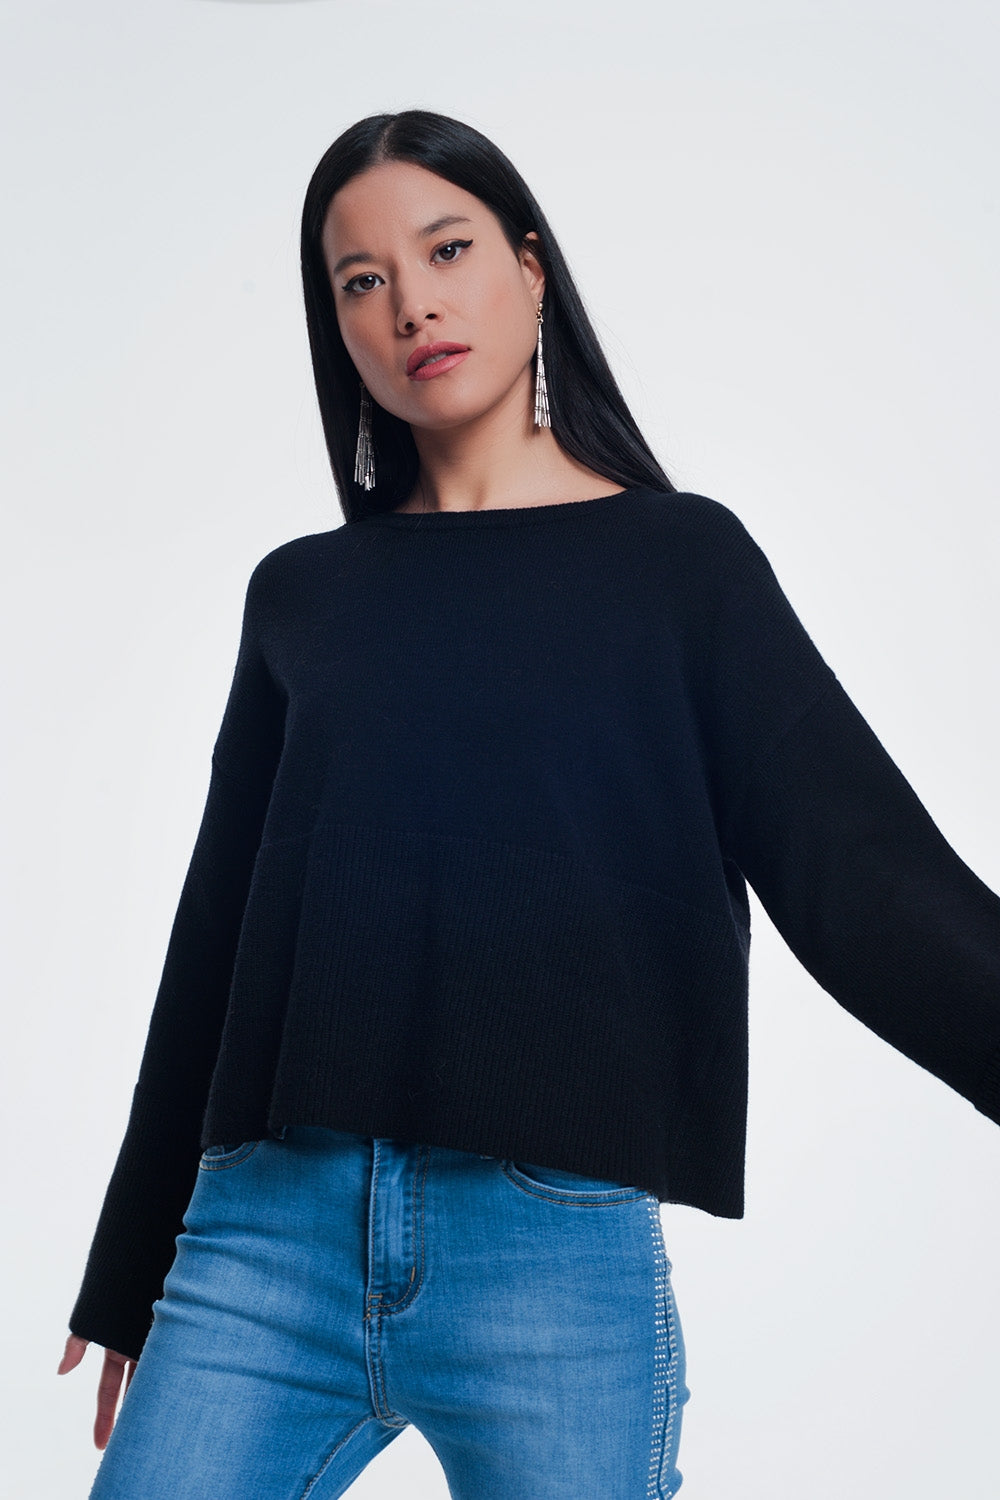 sweater with long sleeves in black